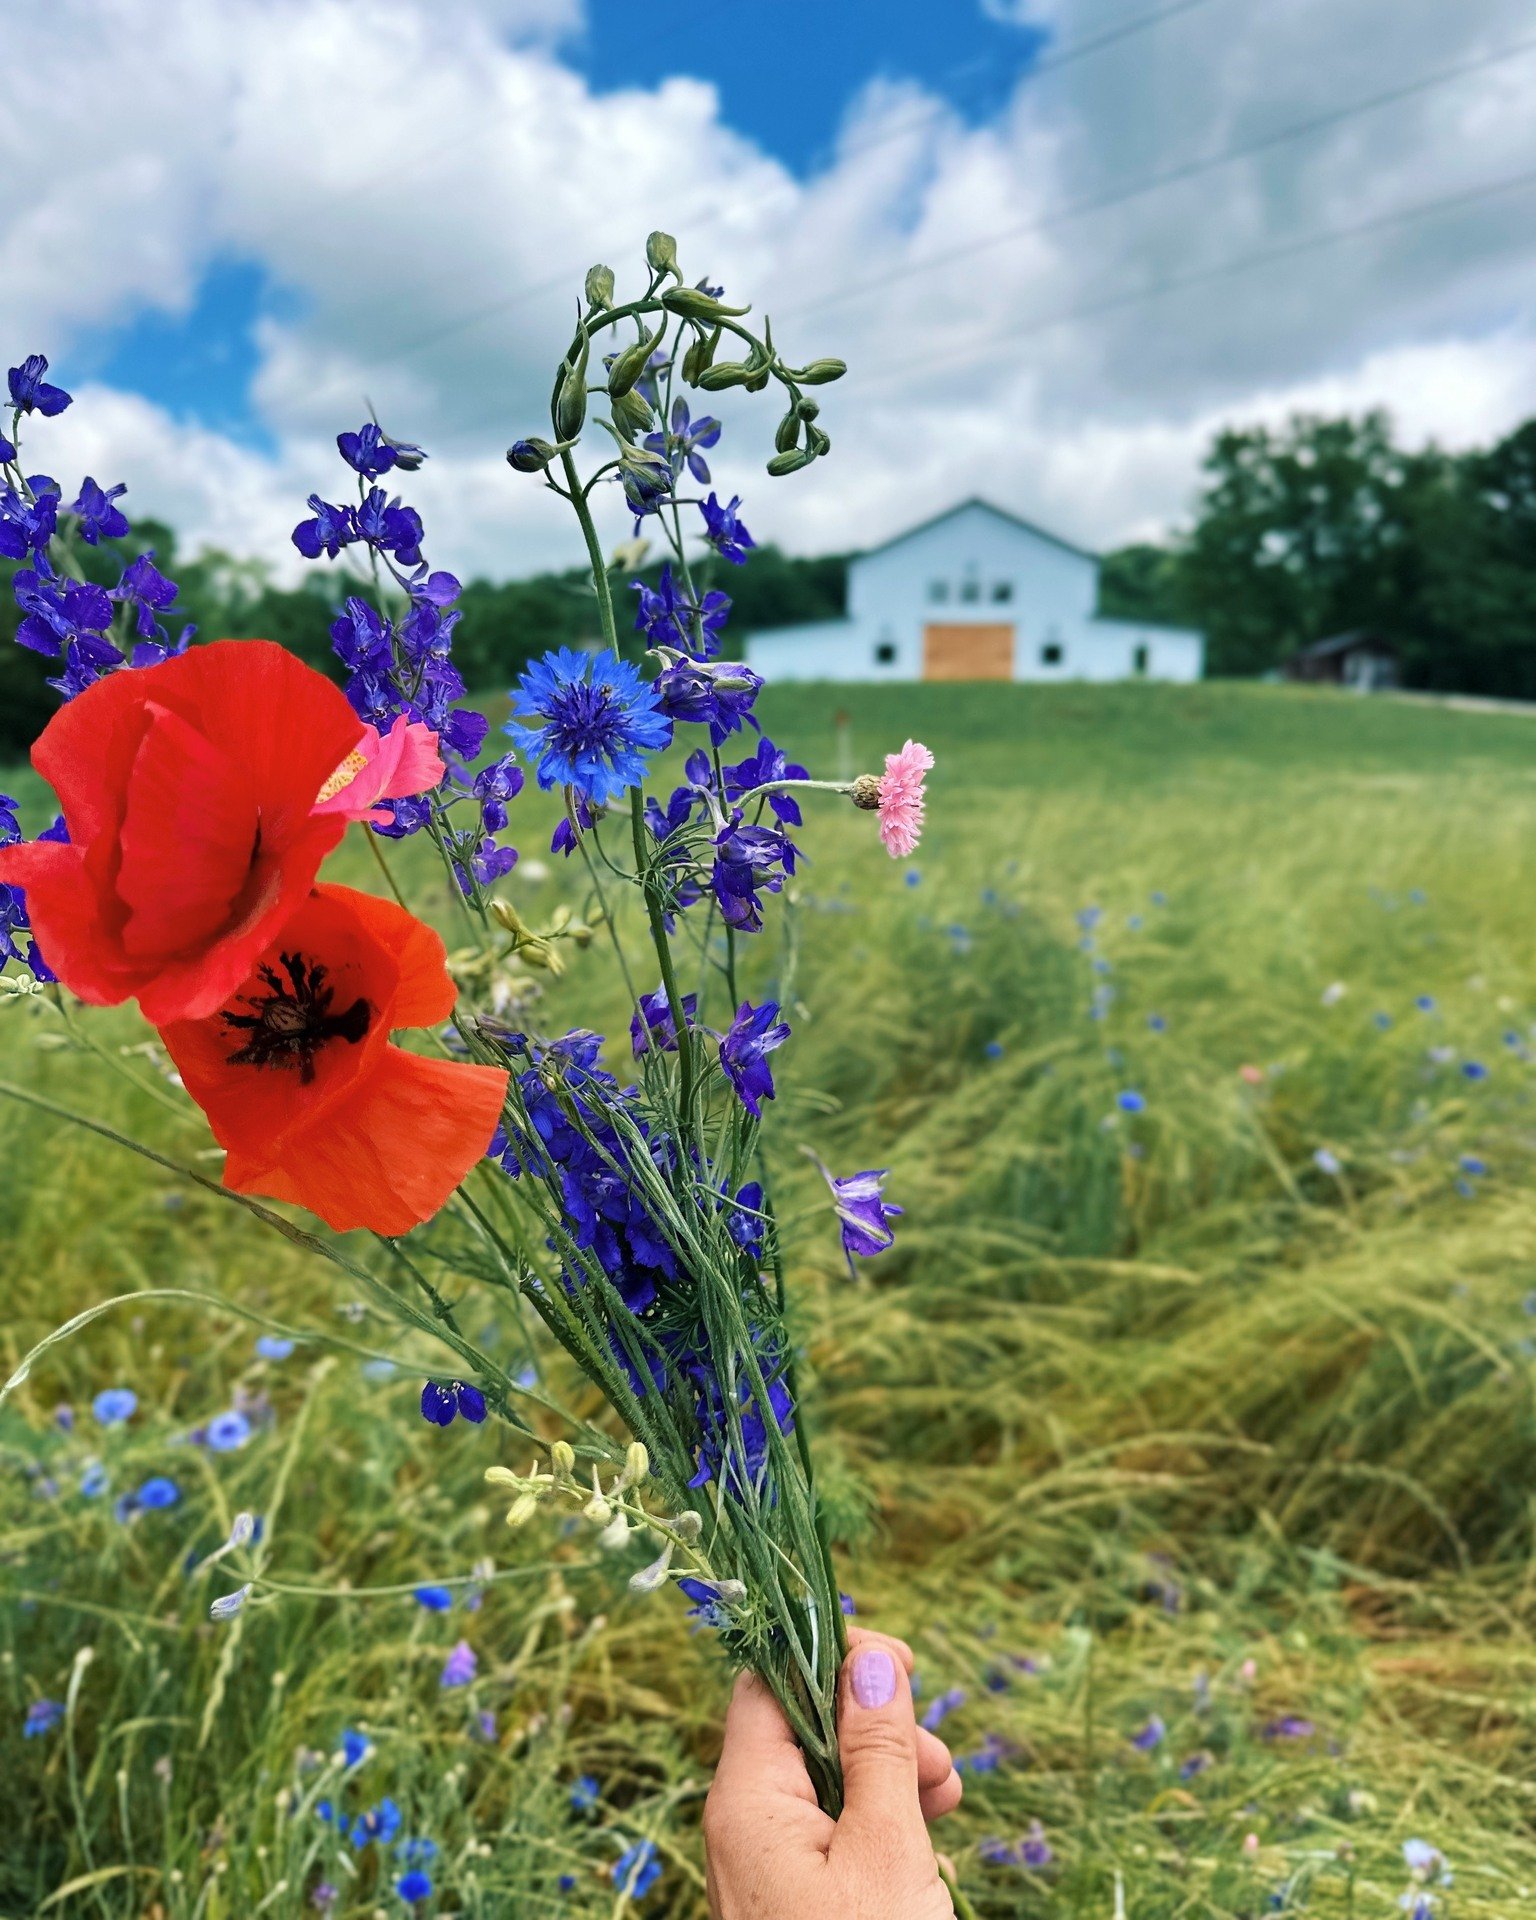 It's been wonderful seeing so many of you at #thekindredfarmstore again! We are open every Saturday from 9am-noon in May and June! 🌸

FYI: the farm store is now located inside our brand new barn! Use the driveway that leads to the big white barn on 